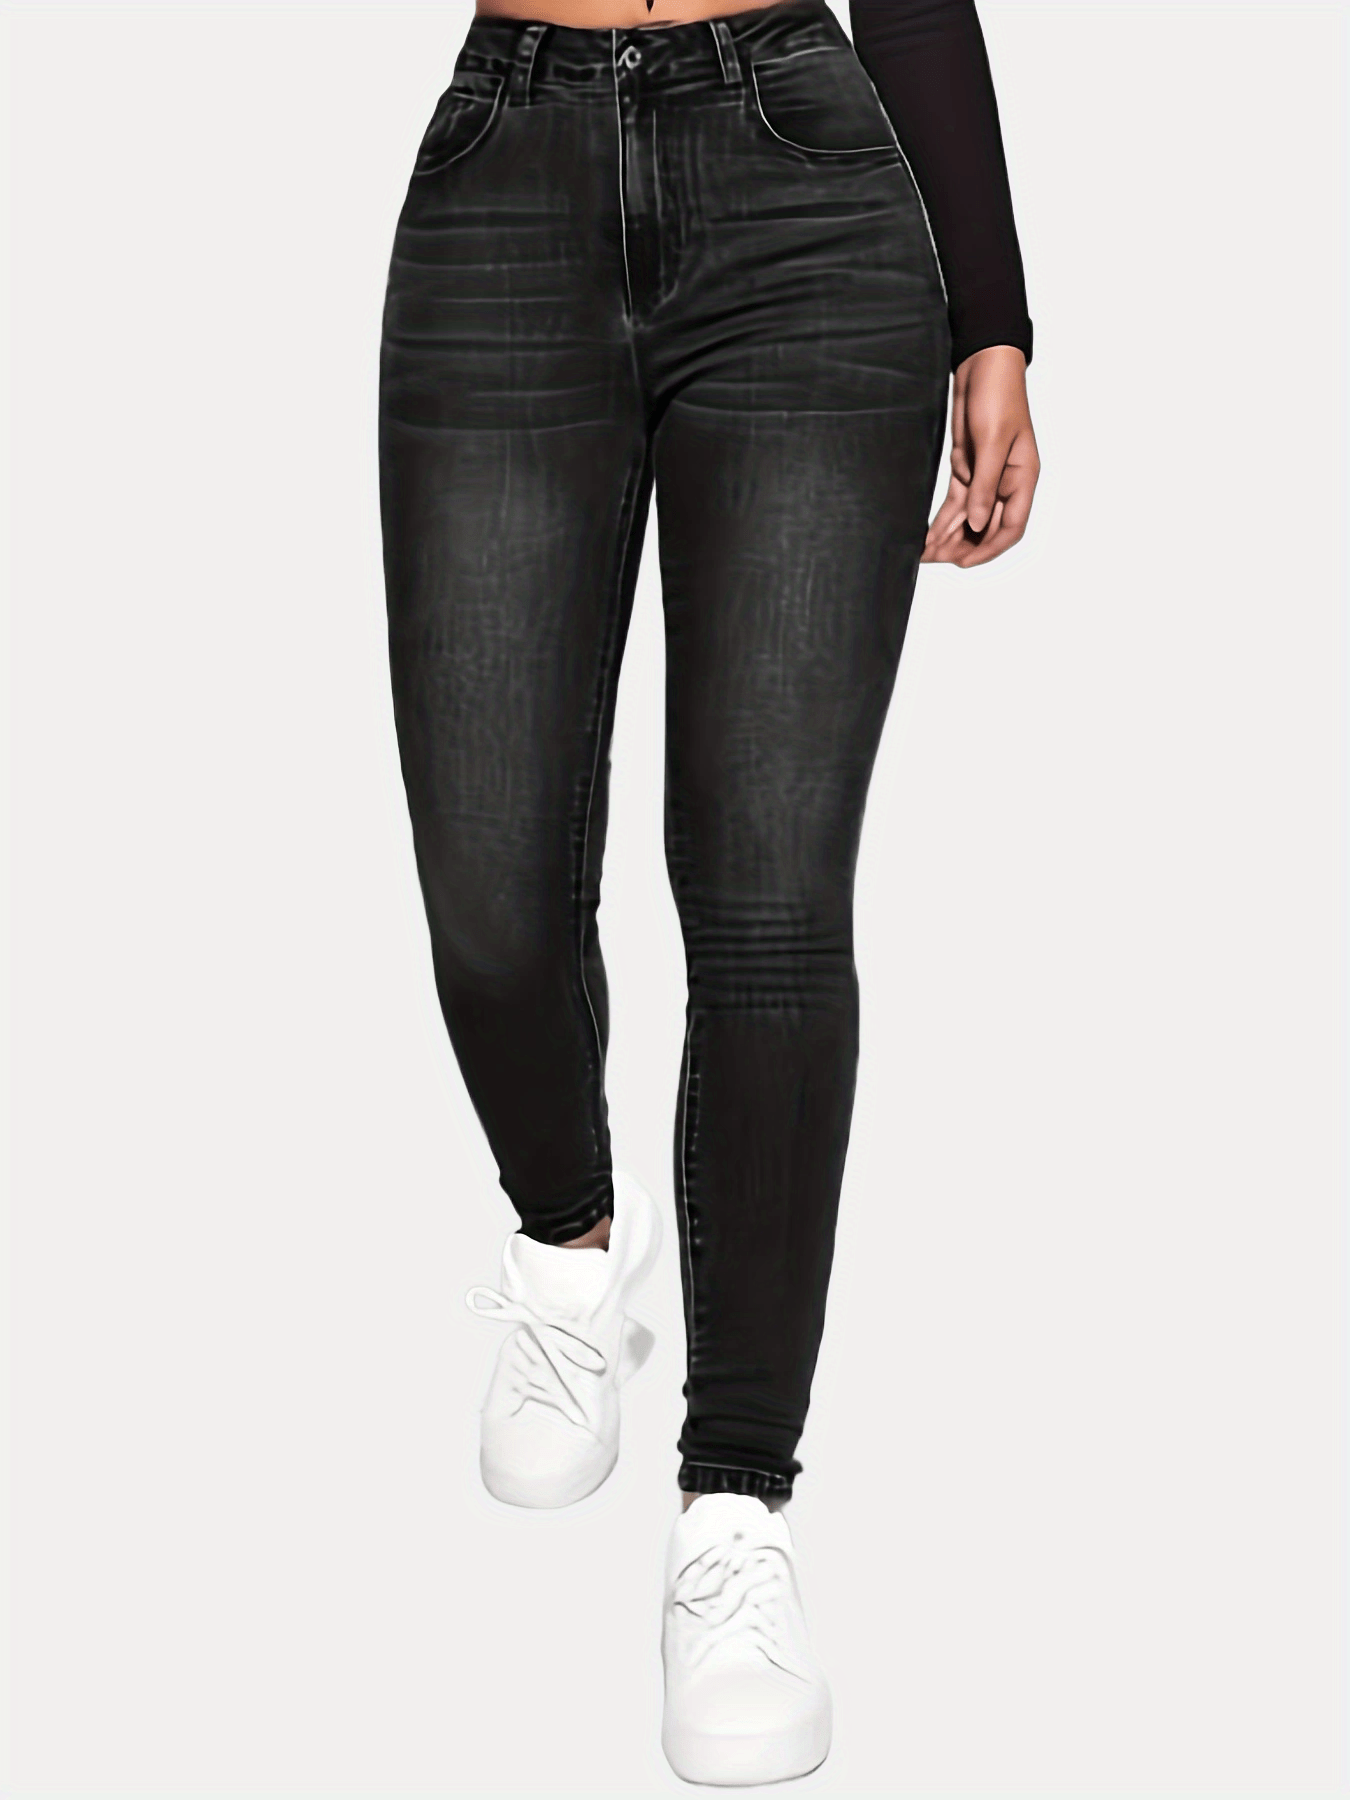 High * Water Ripple Embossed Crotch But Lifting Tummy Control High Stretchy  Plicated Ham Washed Black Color Skinny Jeans, Women's Denim Jeans